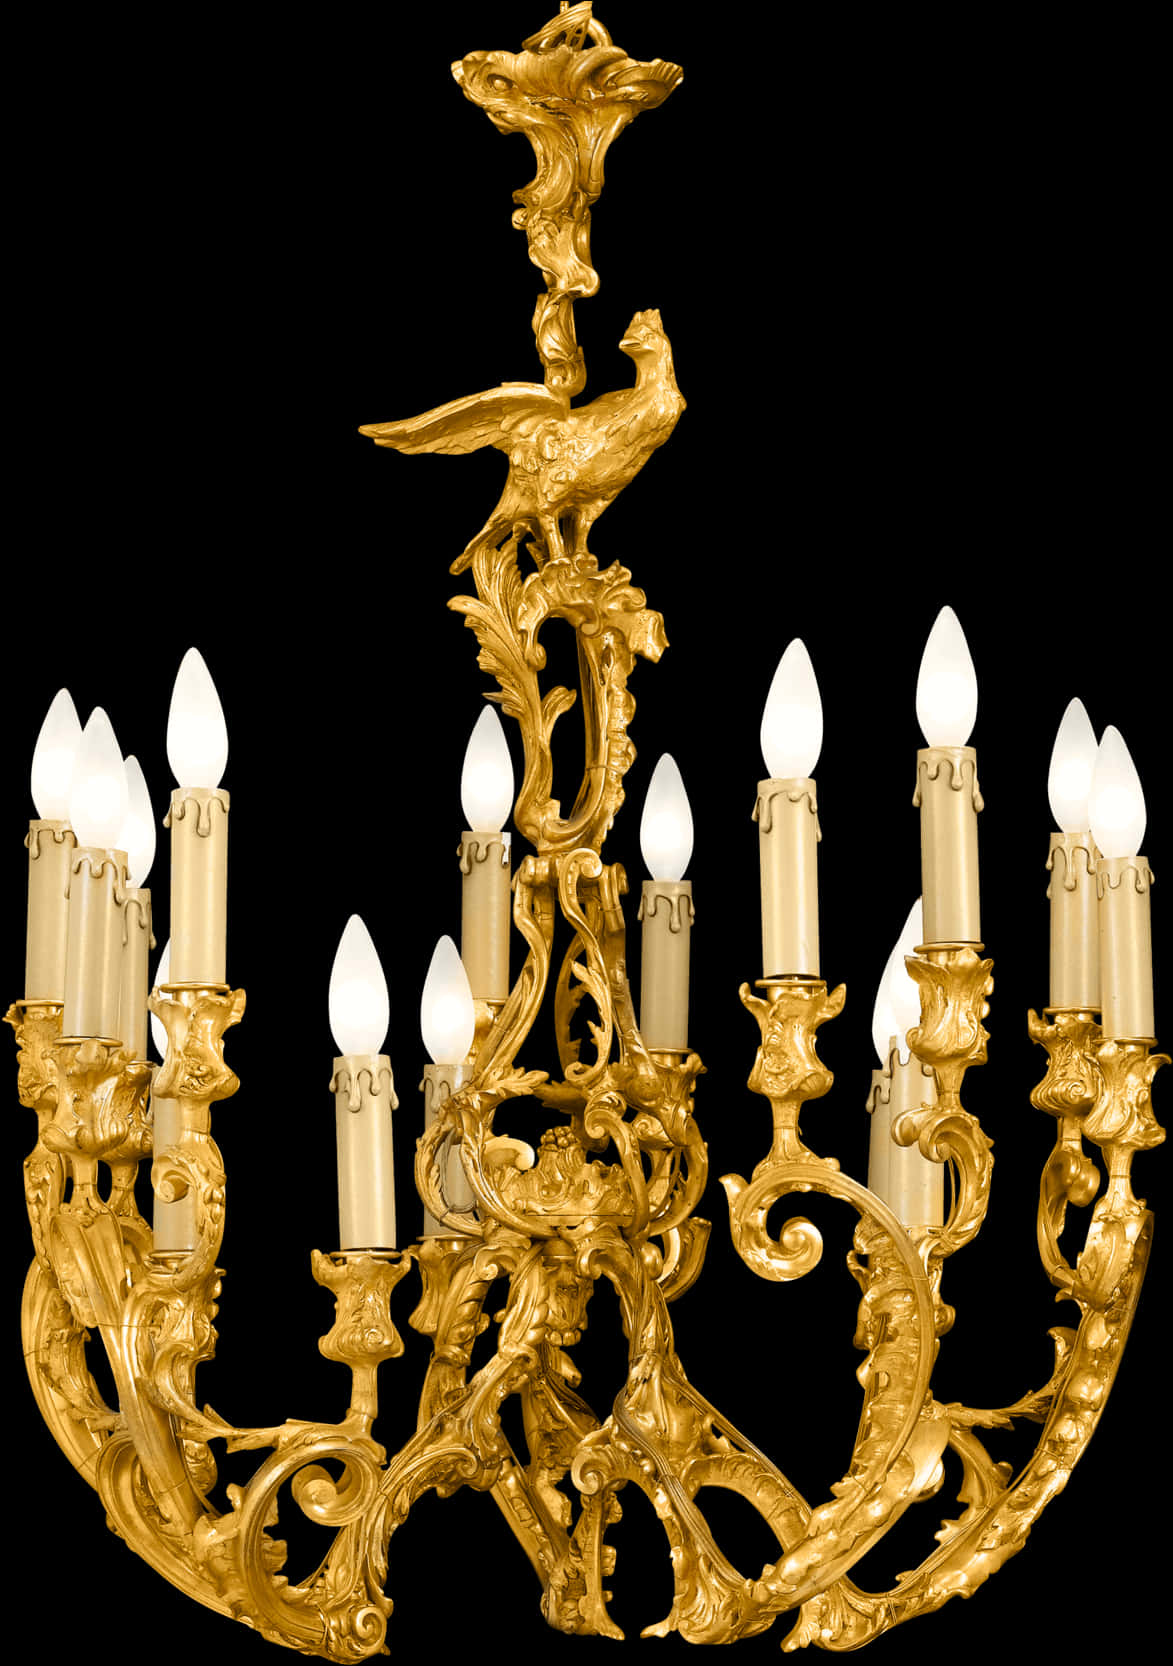 A Gold Chandelier With Candles